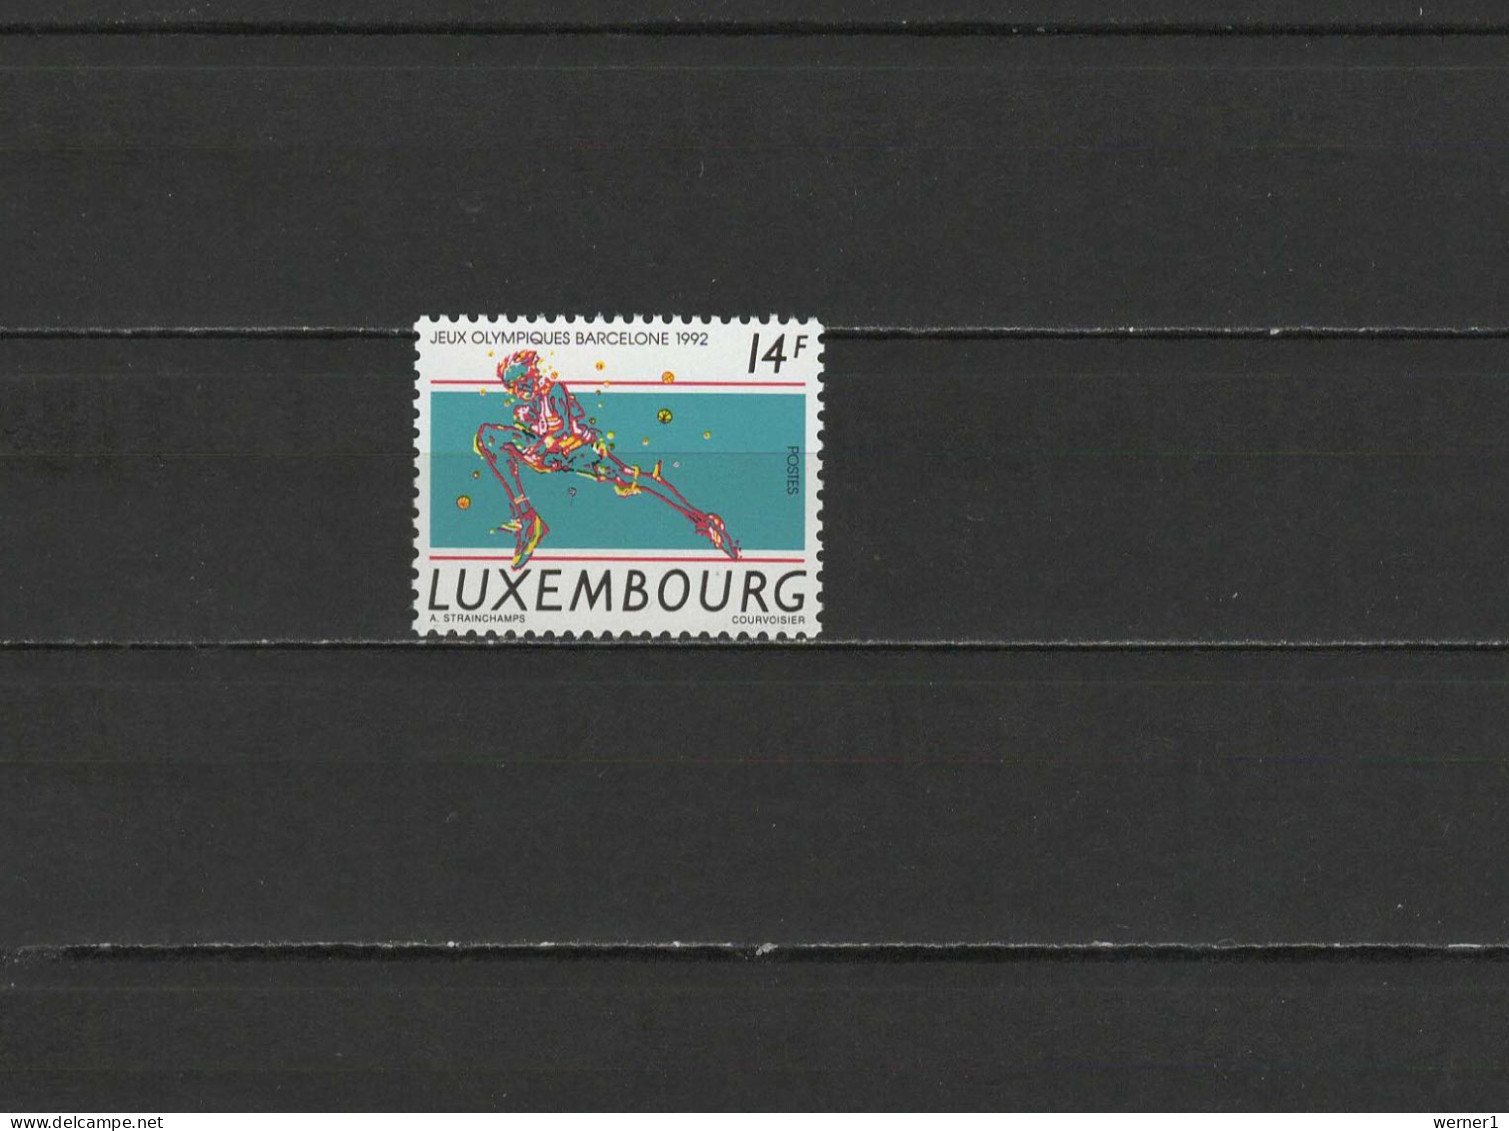 Luxemburg 1992 Olympic Games Barcelona Stamp MNH - Ete 1992: Barcelone